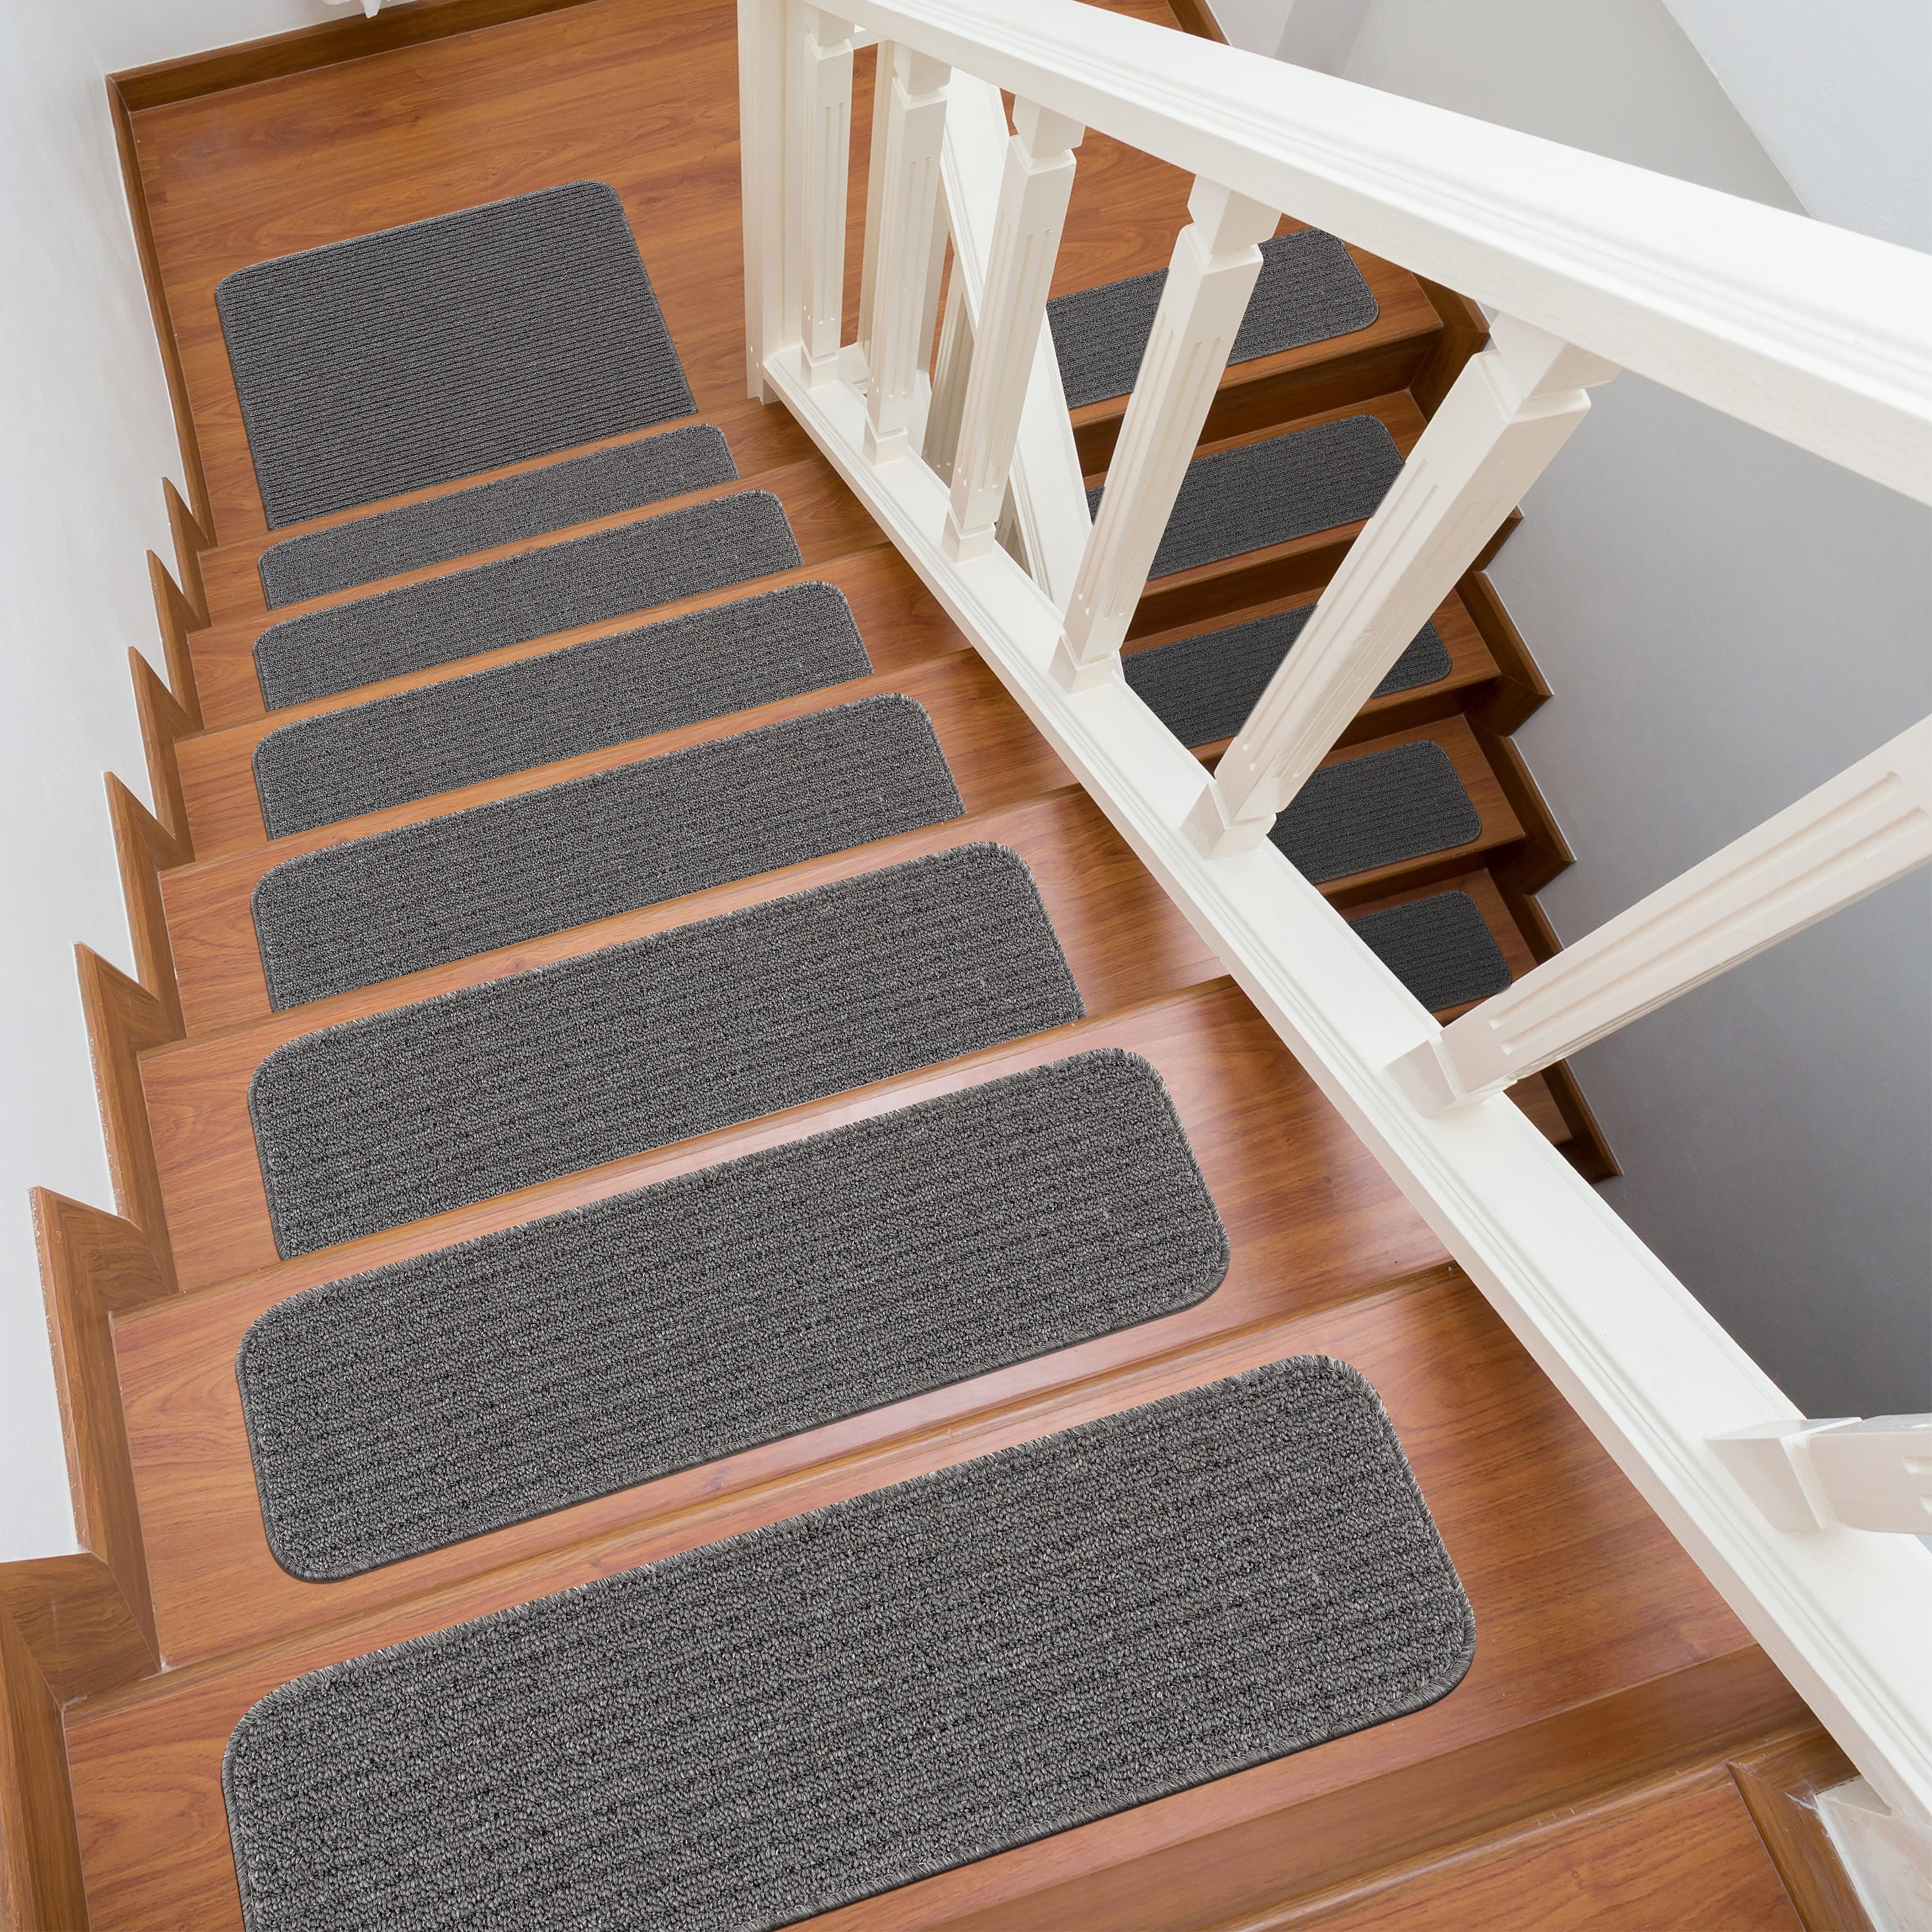 color : Coffee, Size : 45 x 23 cm 15 Set of Stair Pads Step Carpet Non Slip Adhesive Rug/Mat for Stair Tread 